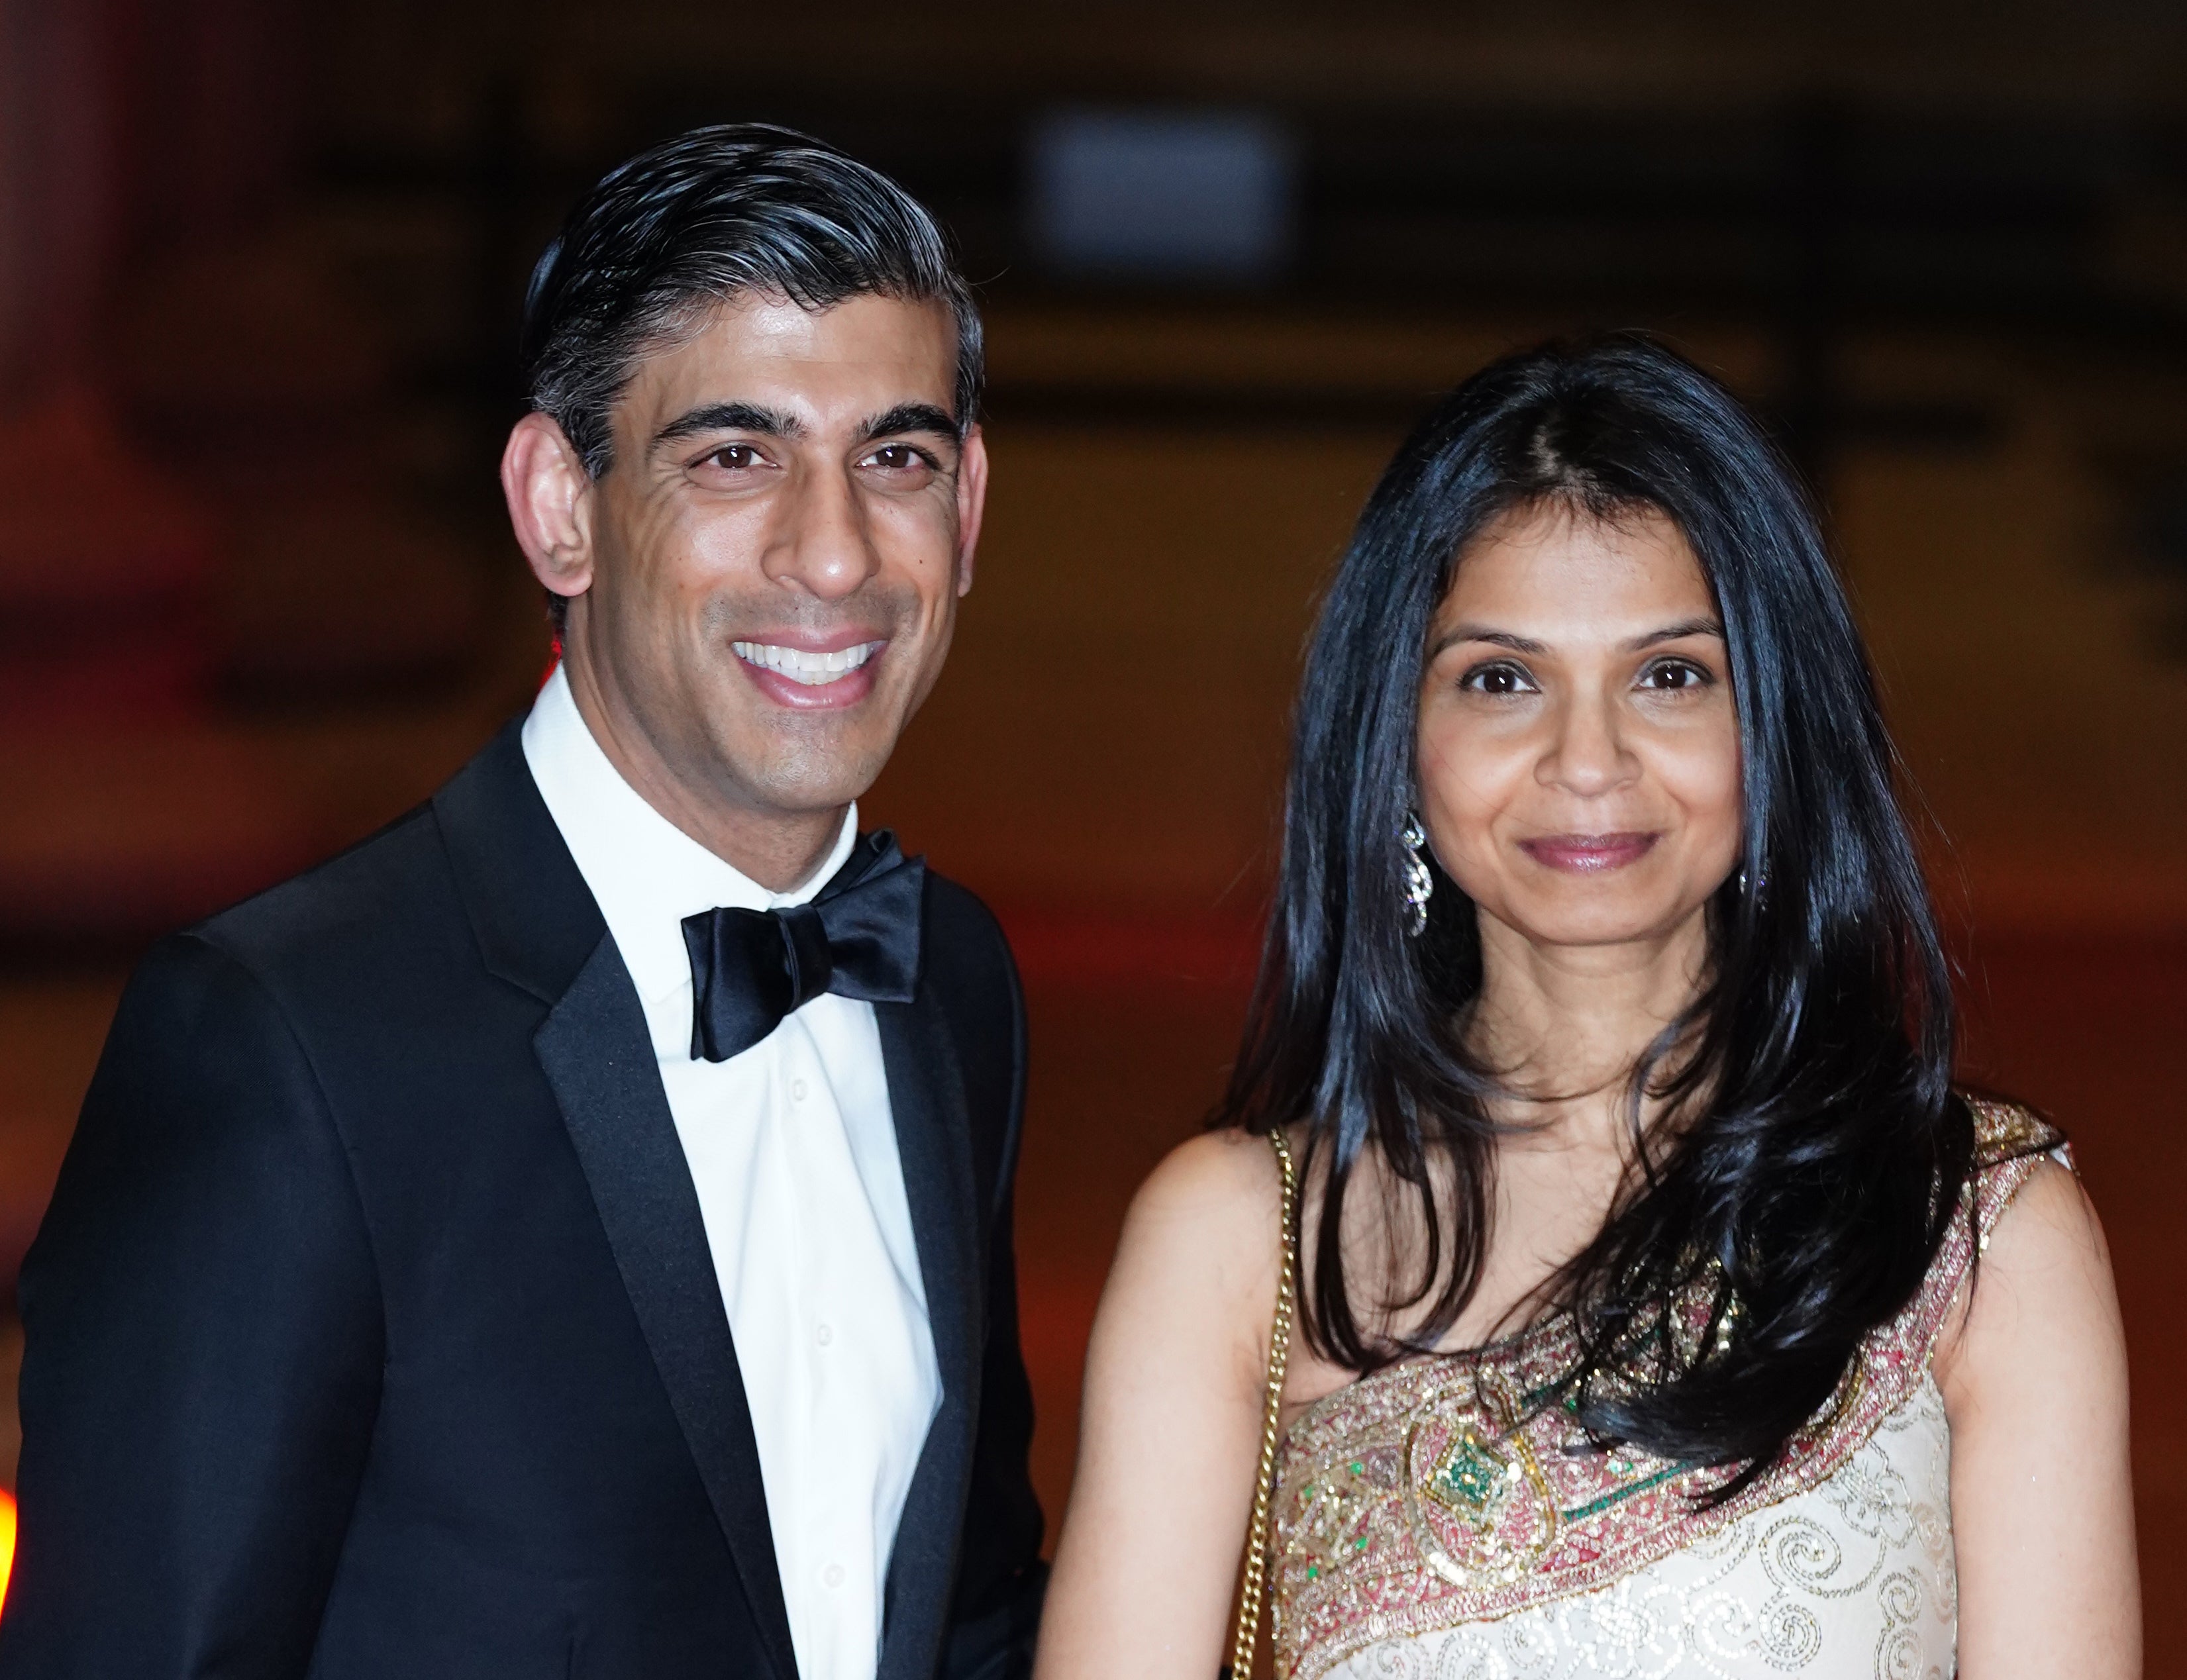 In some ways, Sunak – seen here with his wife, Akshata Murthy – is a classic Conservative success story